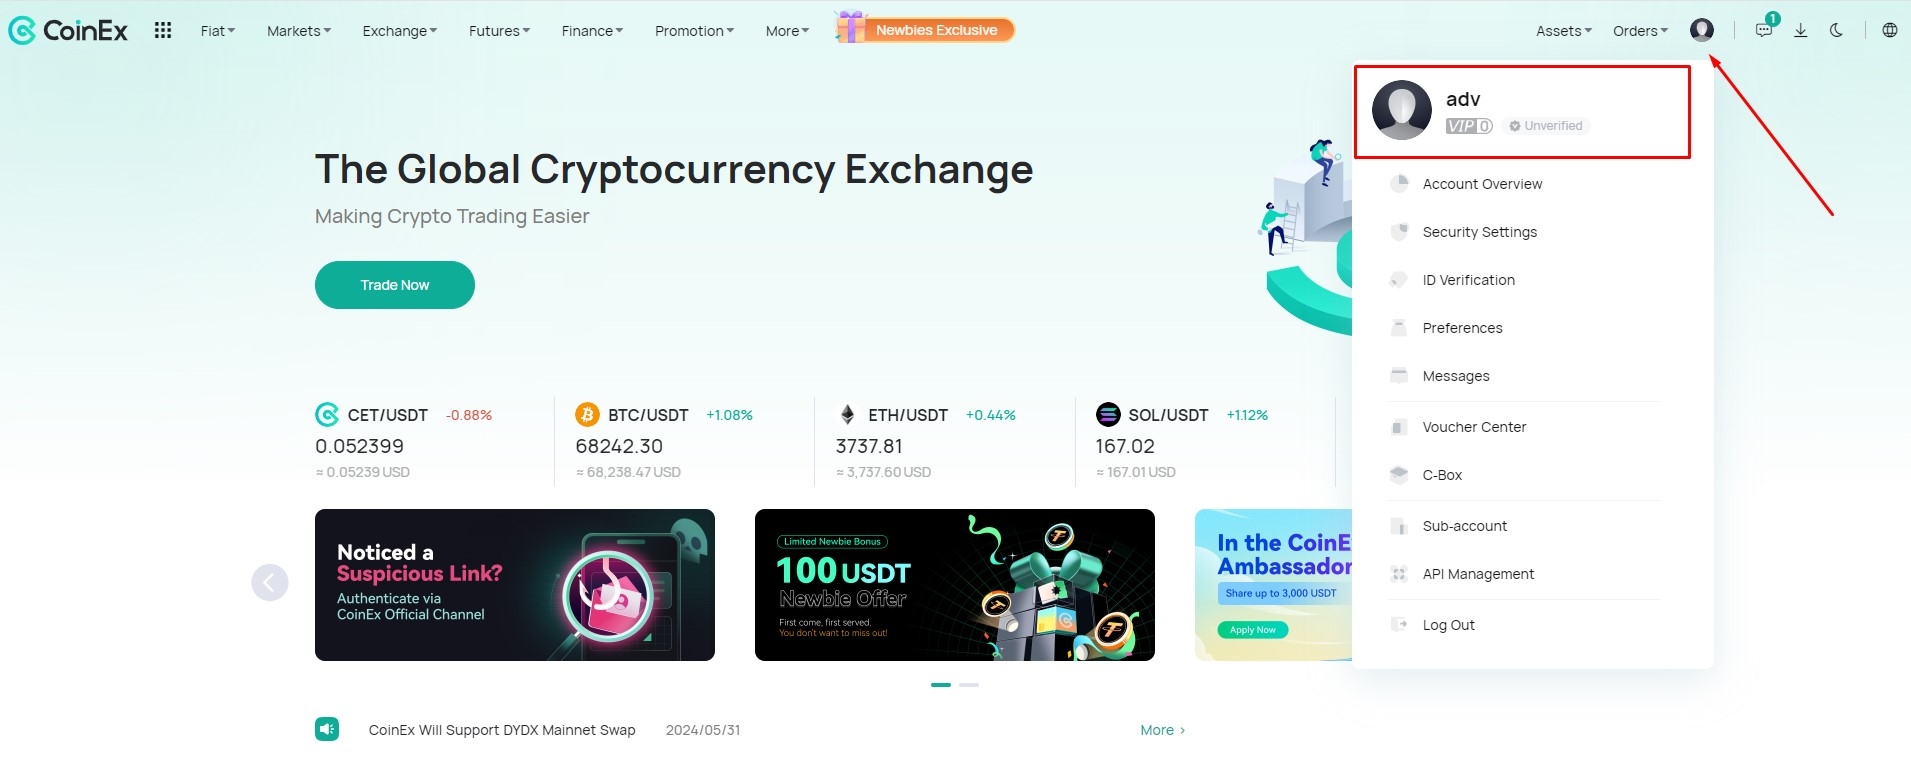 How to view your VIP level on CoinEx